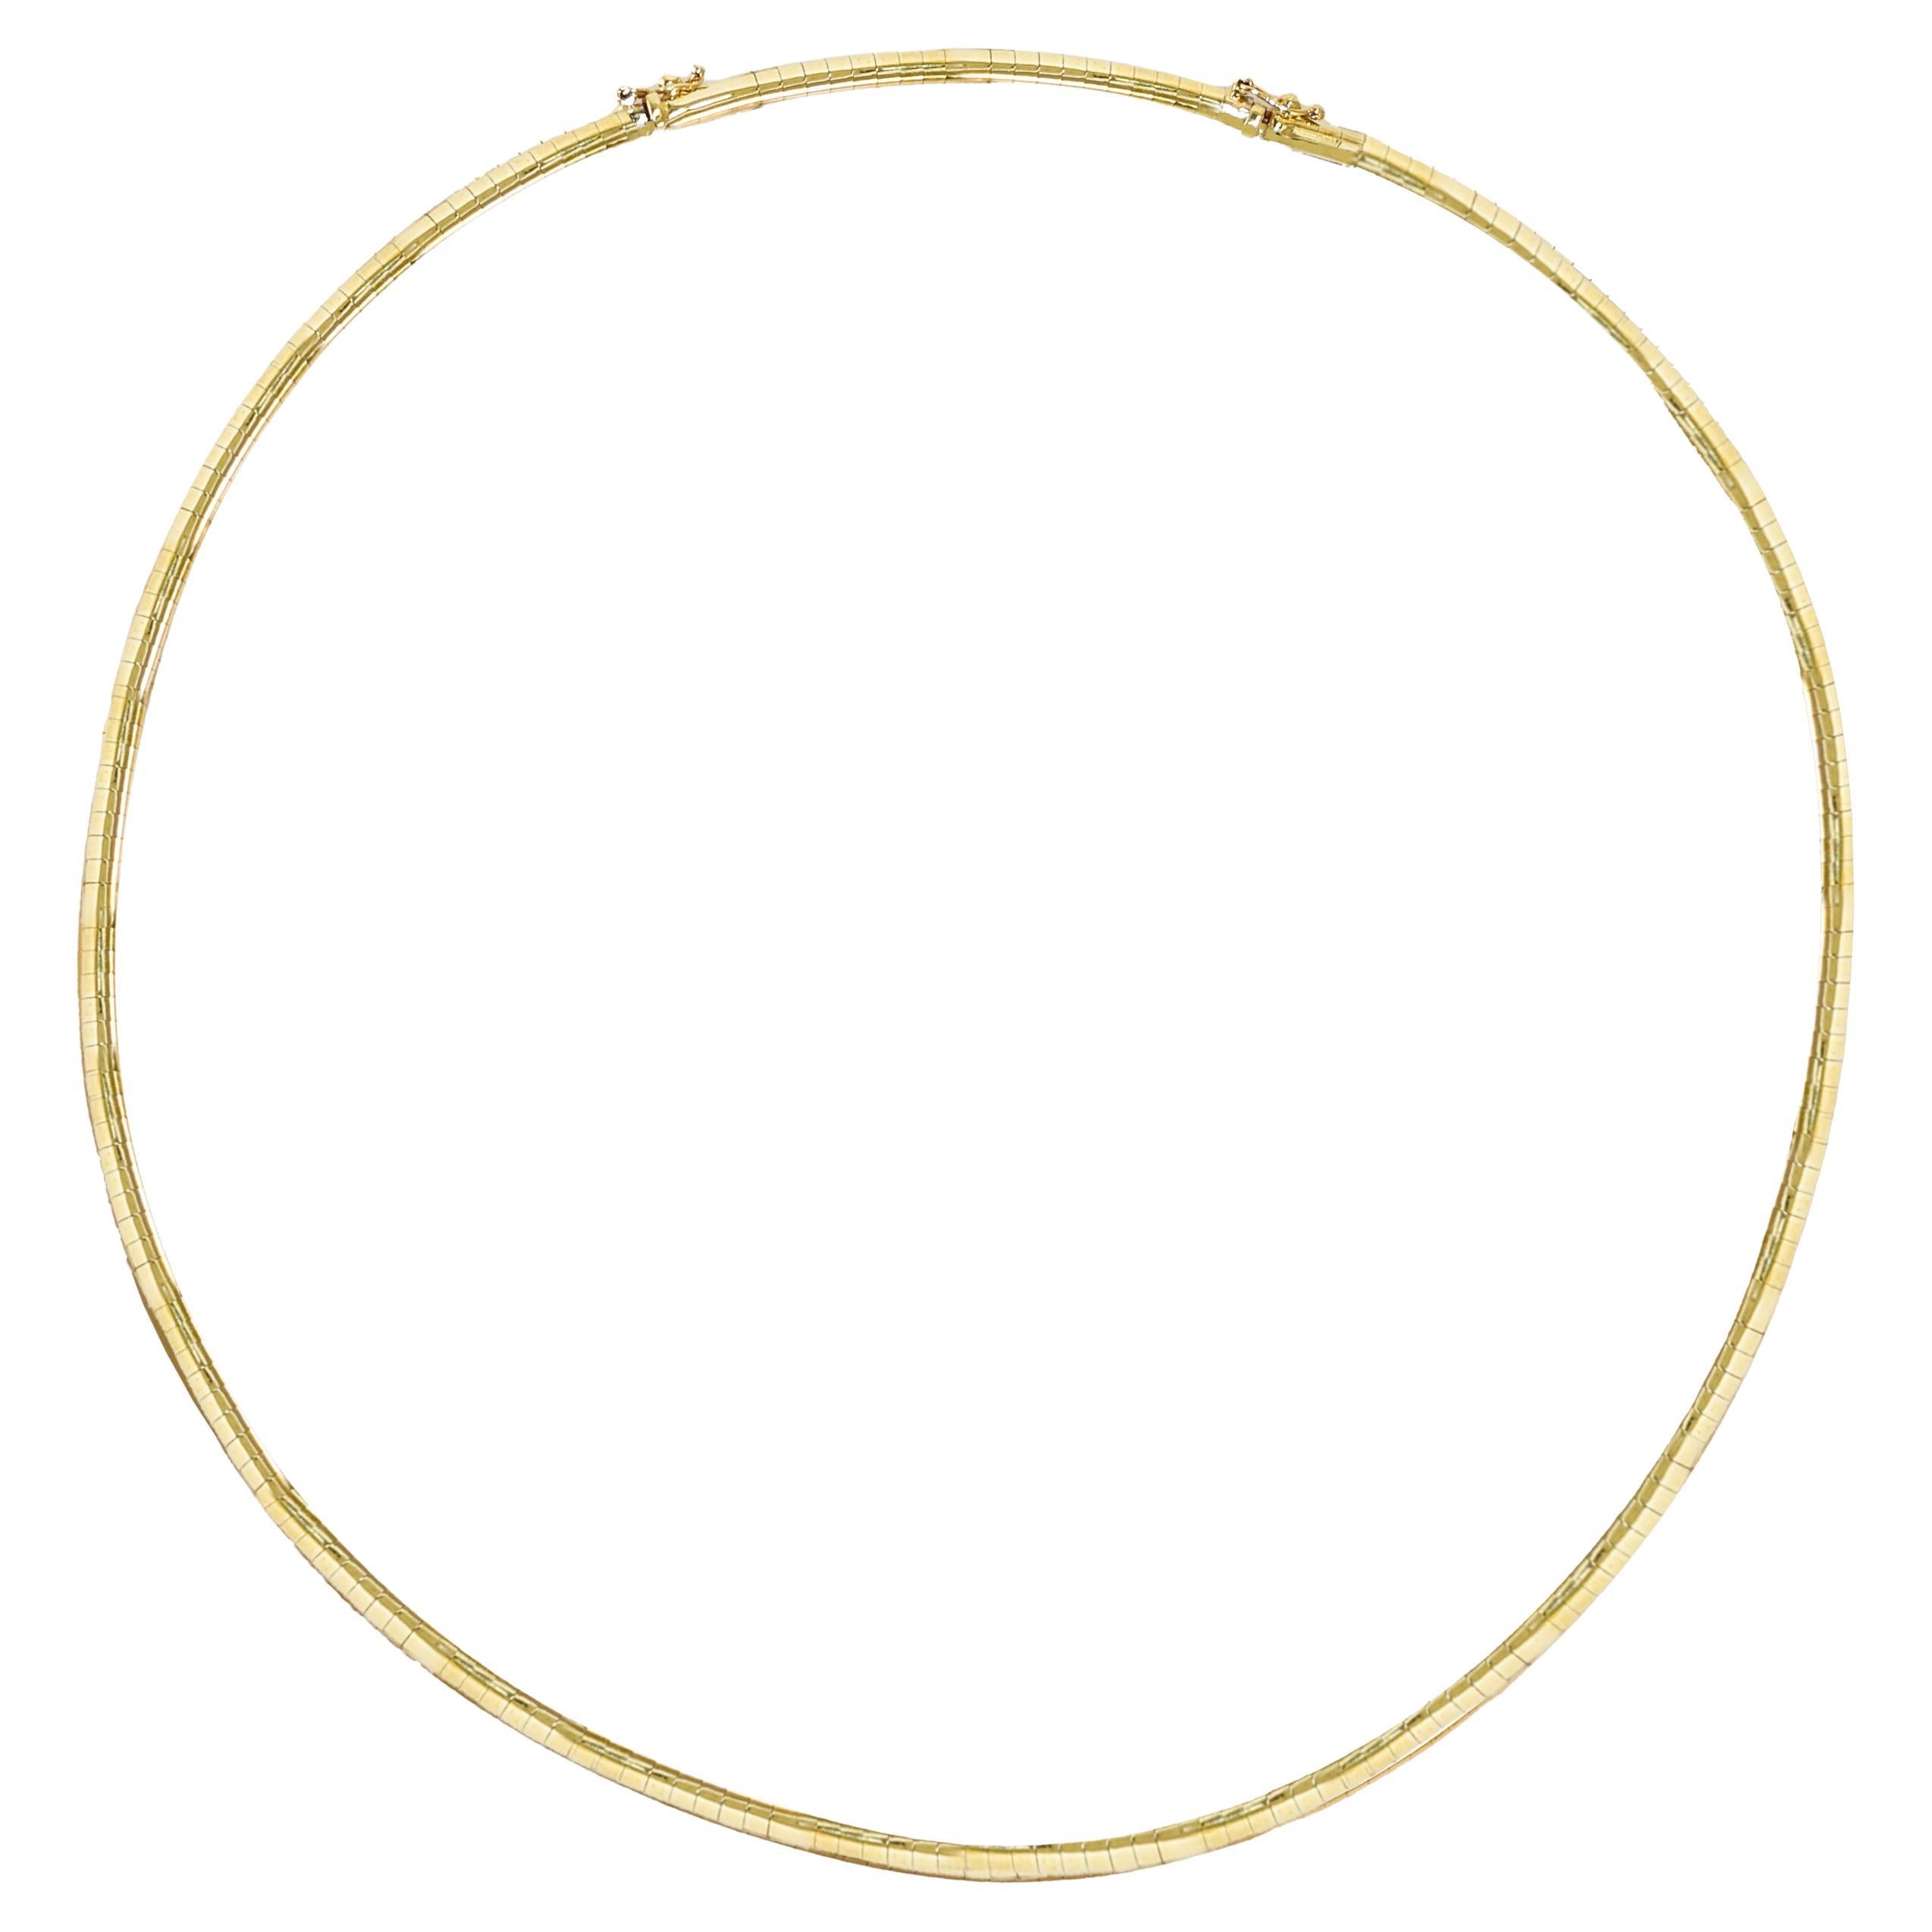 14K Yellow Gold Omega Chain Necklace 18", 21g